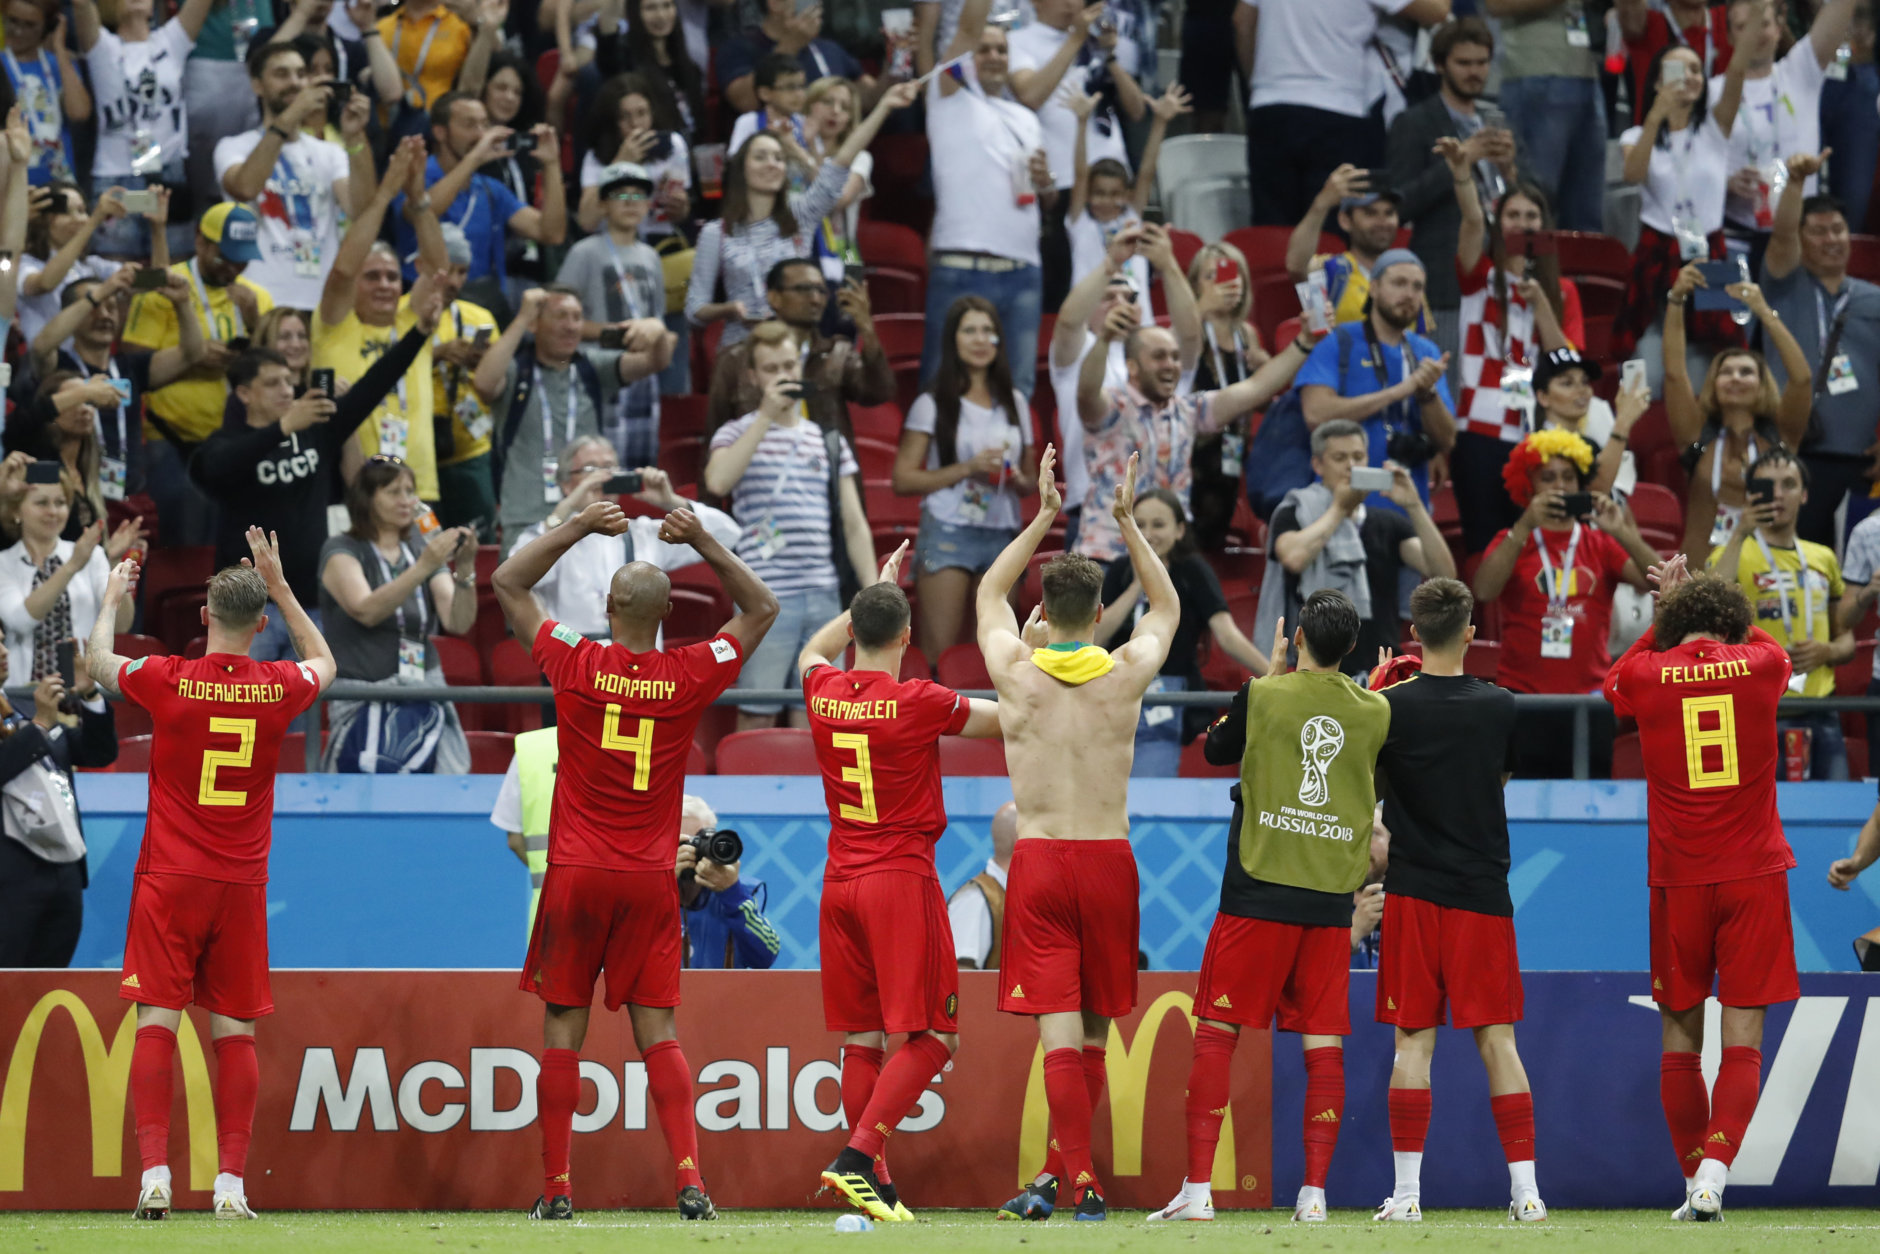 Belgium players and supporters celebrate at the end of the quarterfinal match between Brazil and Belgium at the 2018 soccer World Cup in the Kazan Arena, in Kazan, Russia, Friday, July 6, 2018. (AP Photo/Eduardo Verdugo)